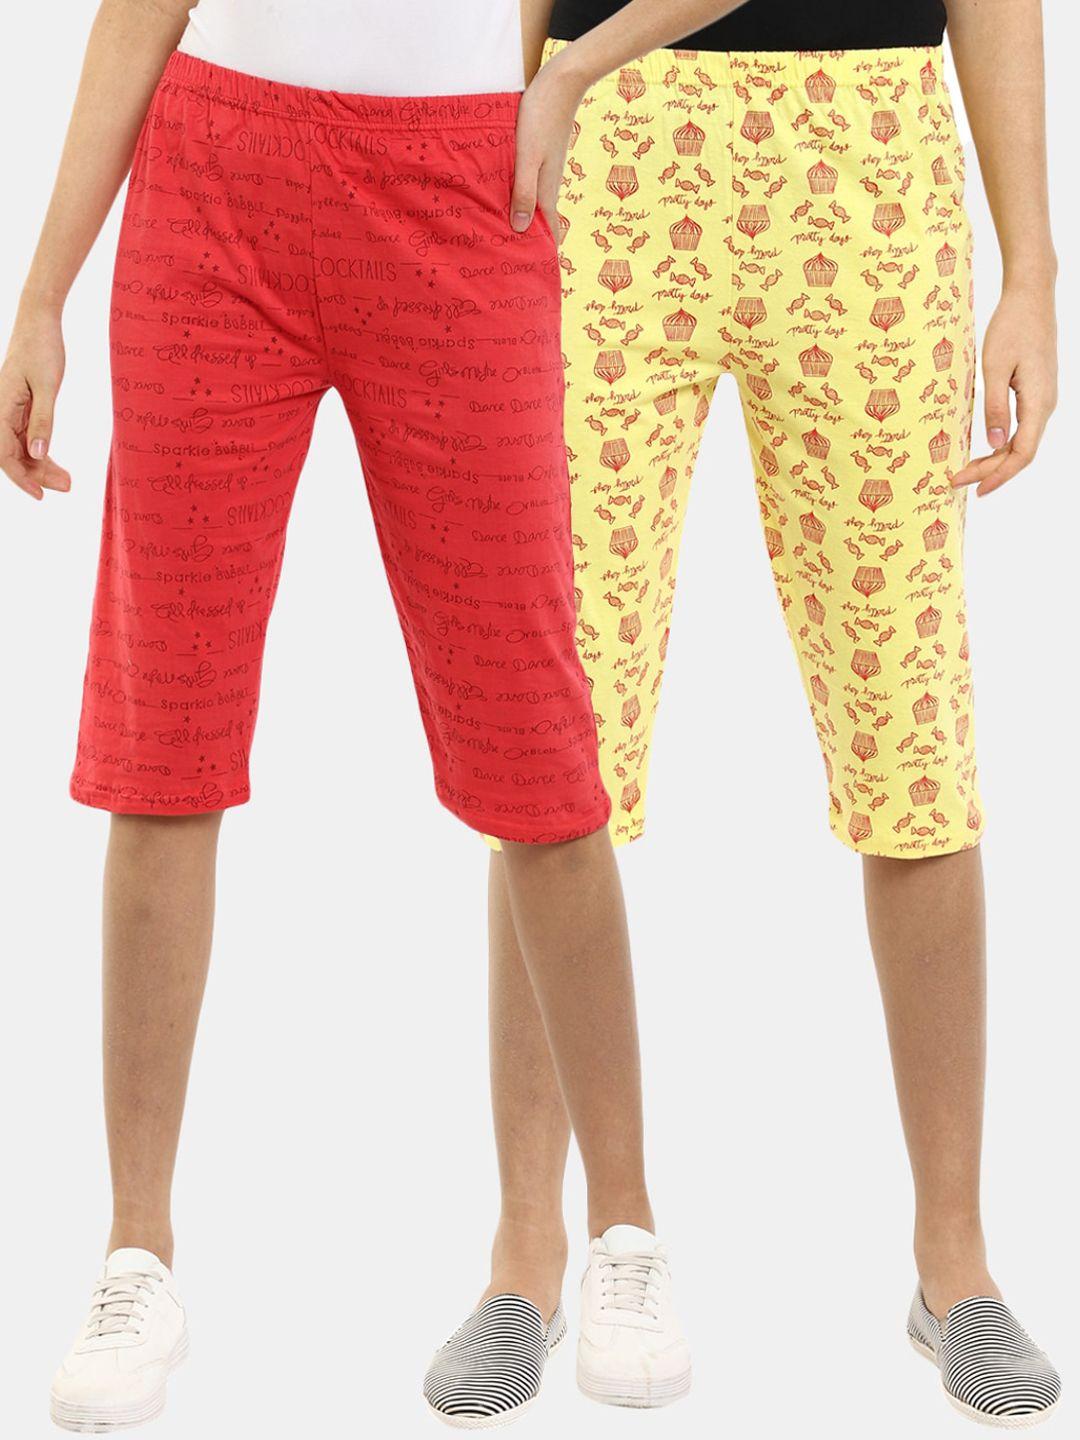 v-mart pack of 2 women coral red & yellow printed shorts